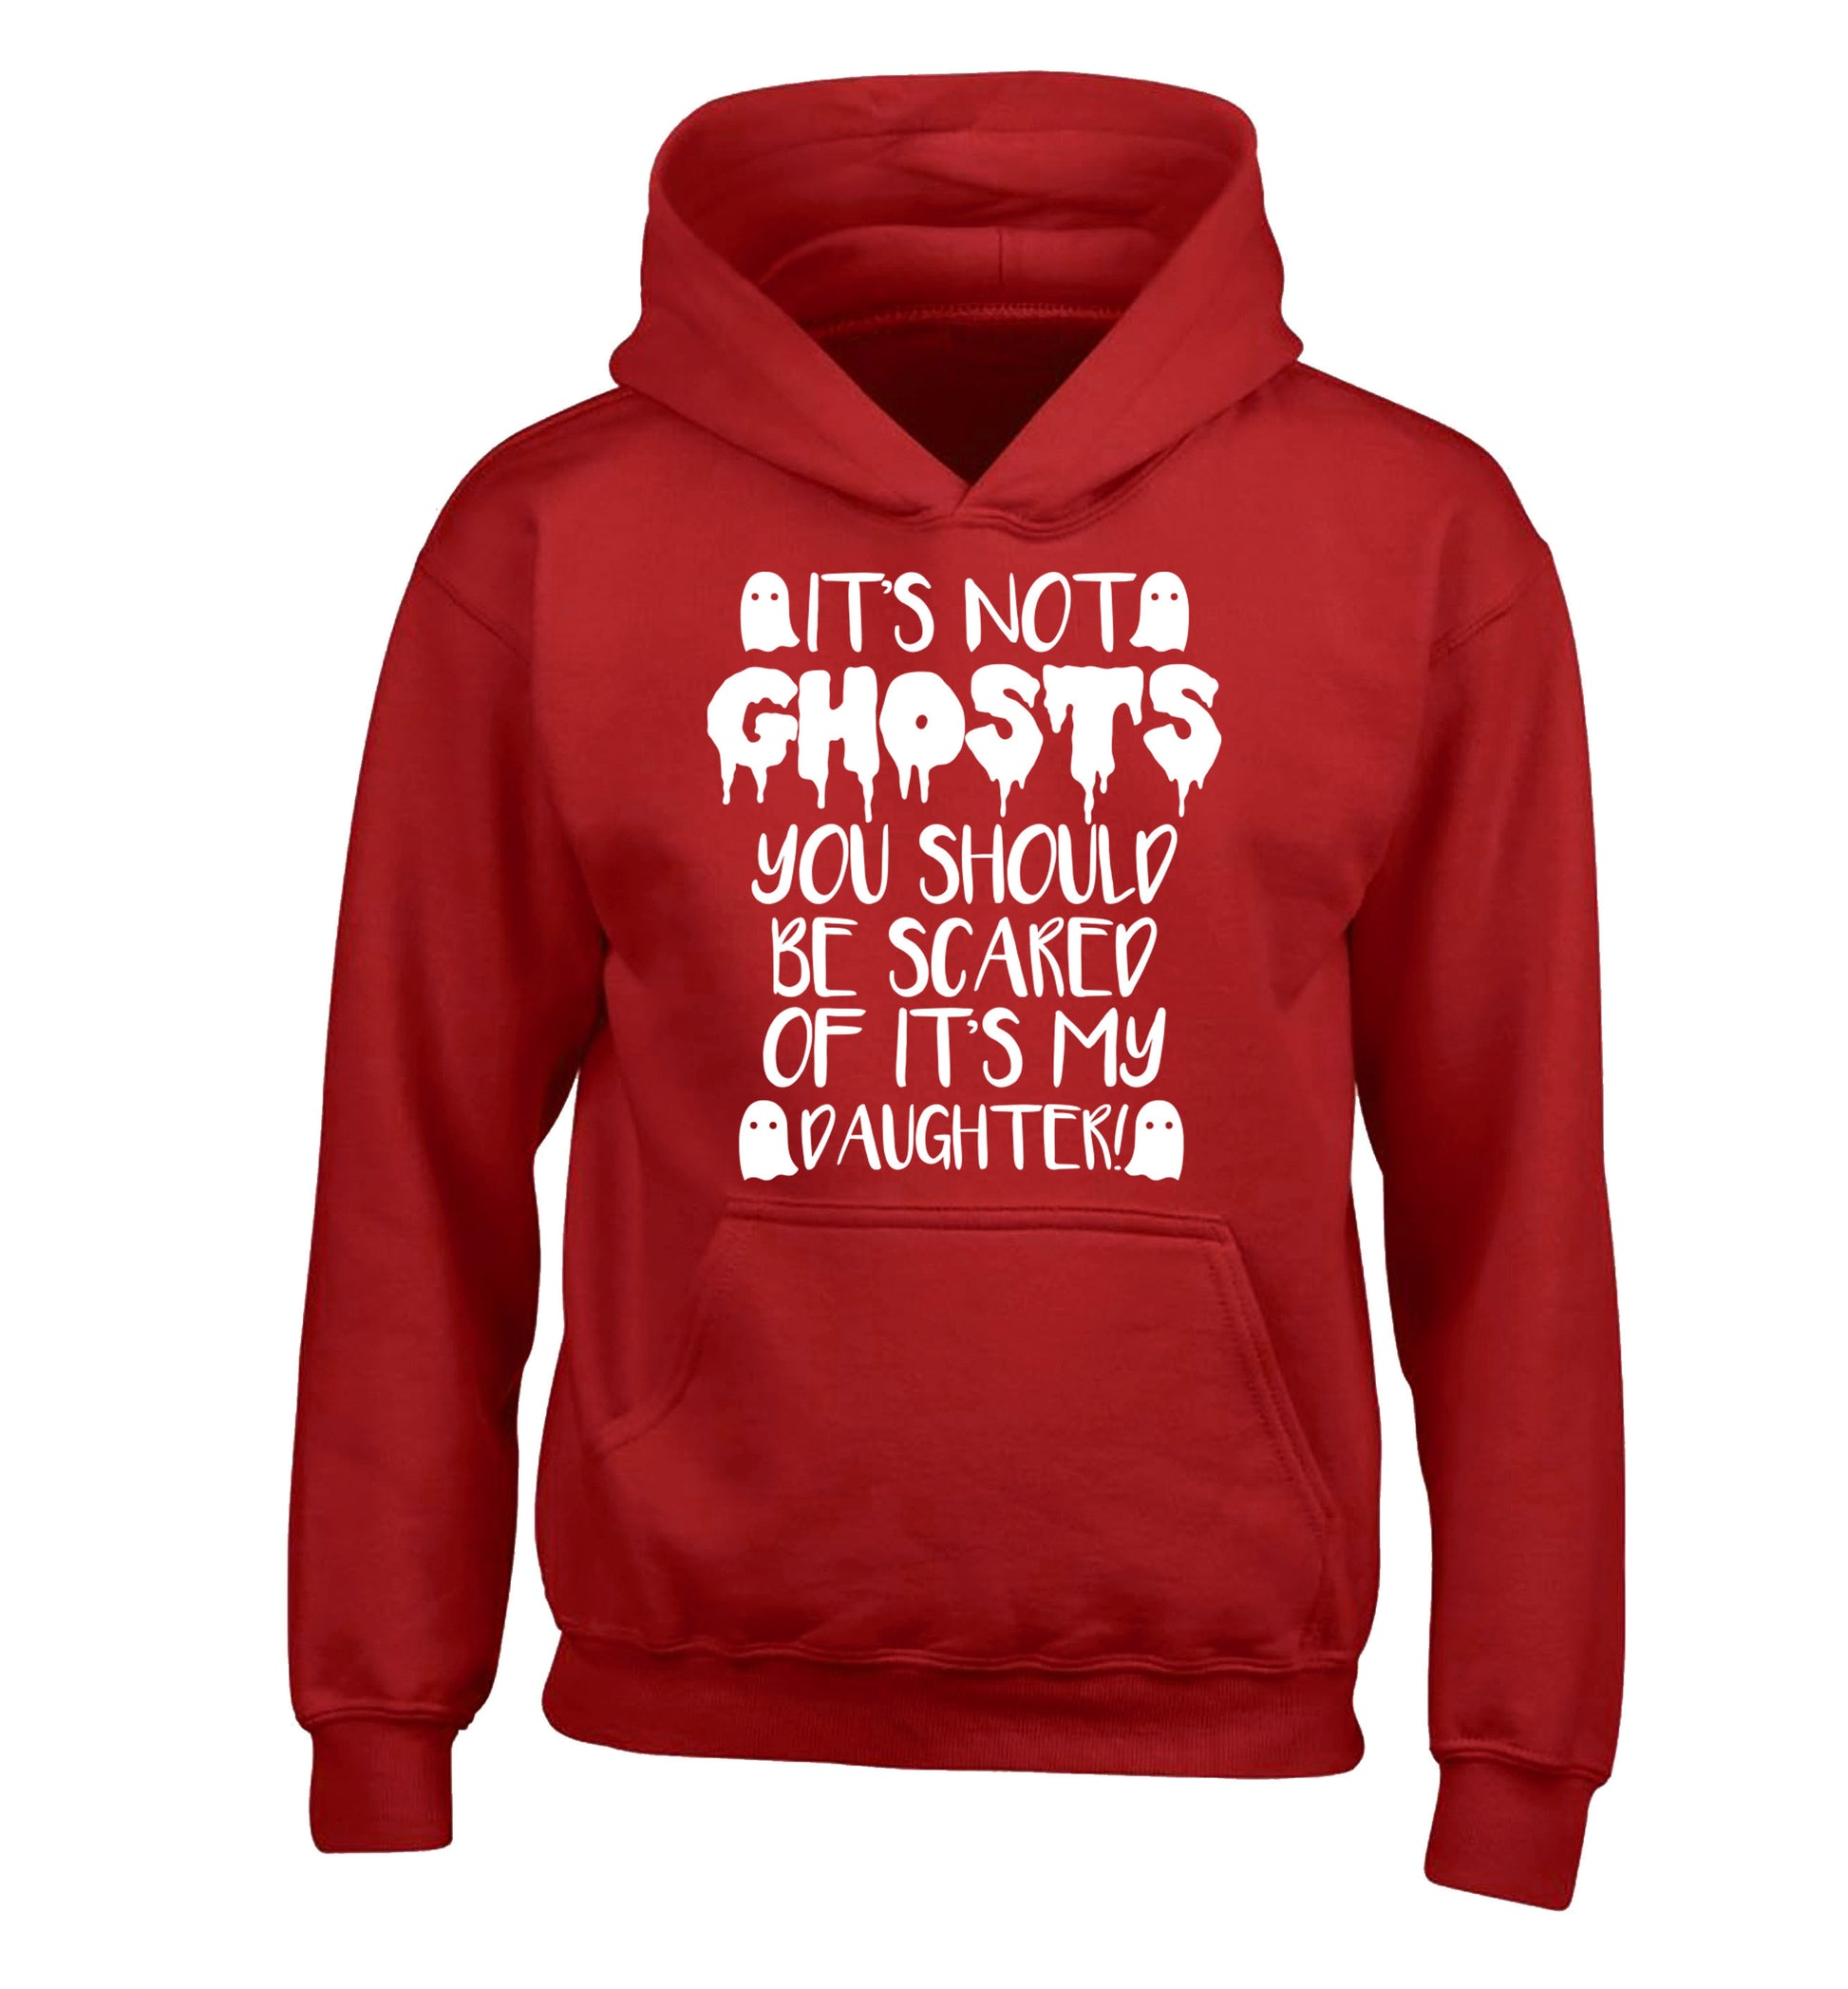 It's not ghosts you should be scared of it's my daughter! children's red hoodie 12-14 Years